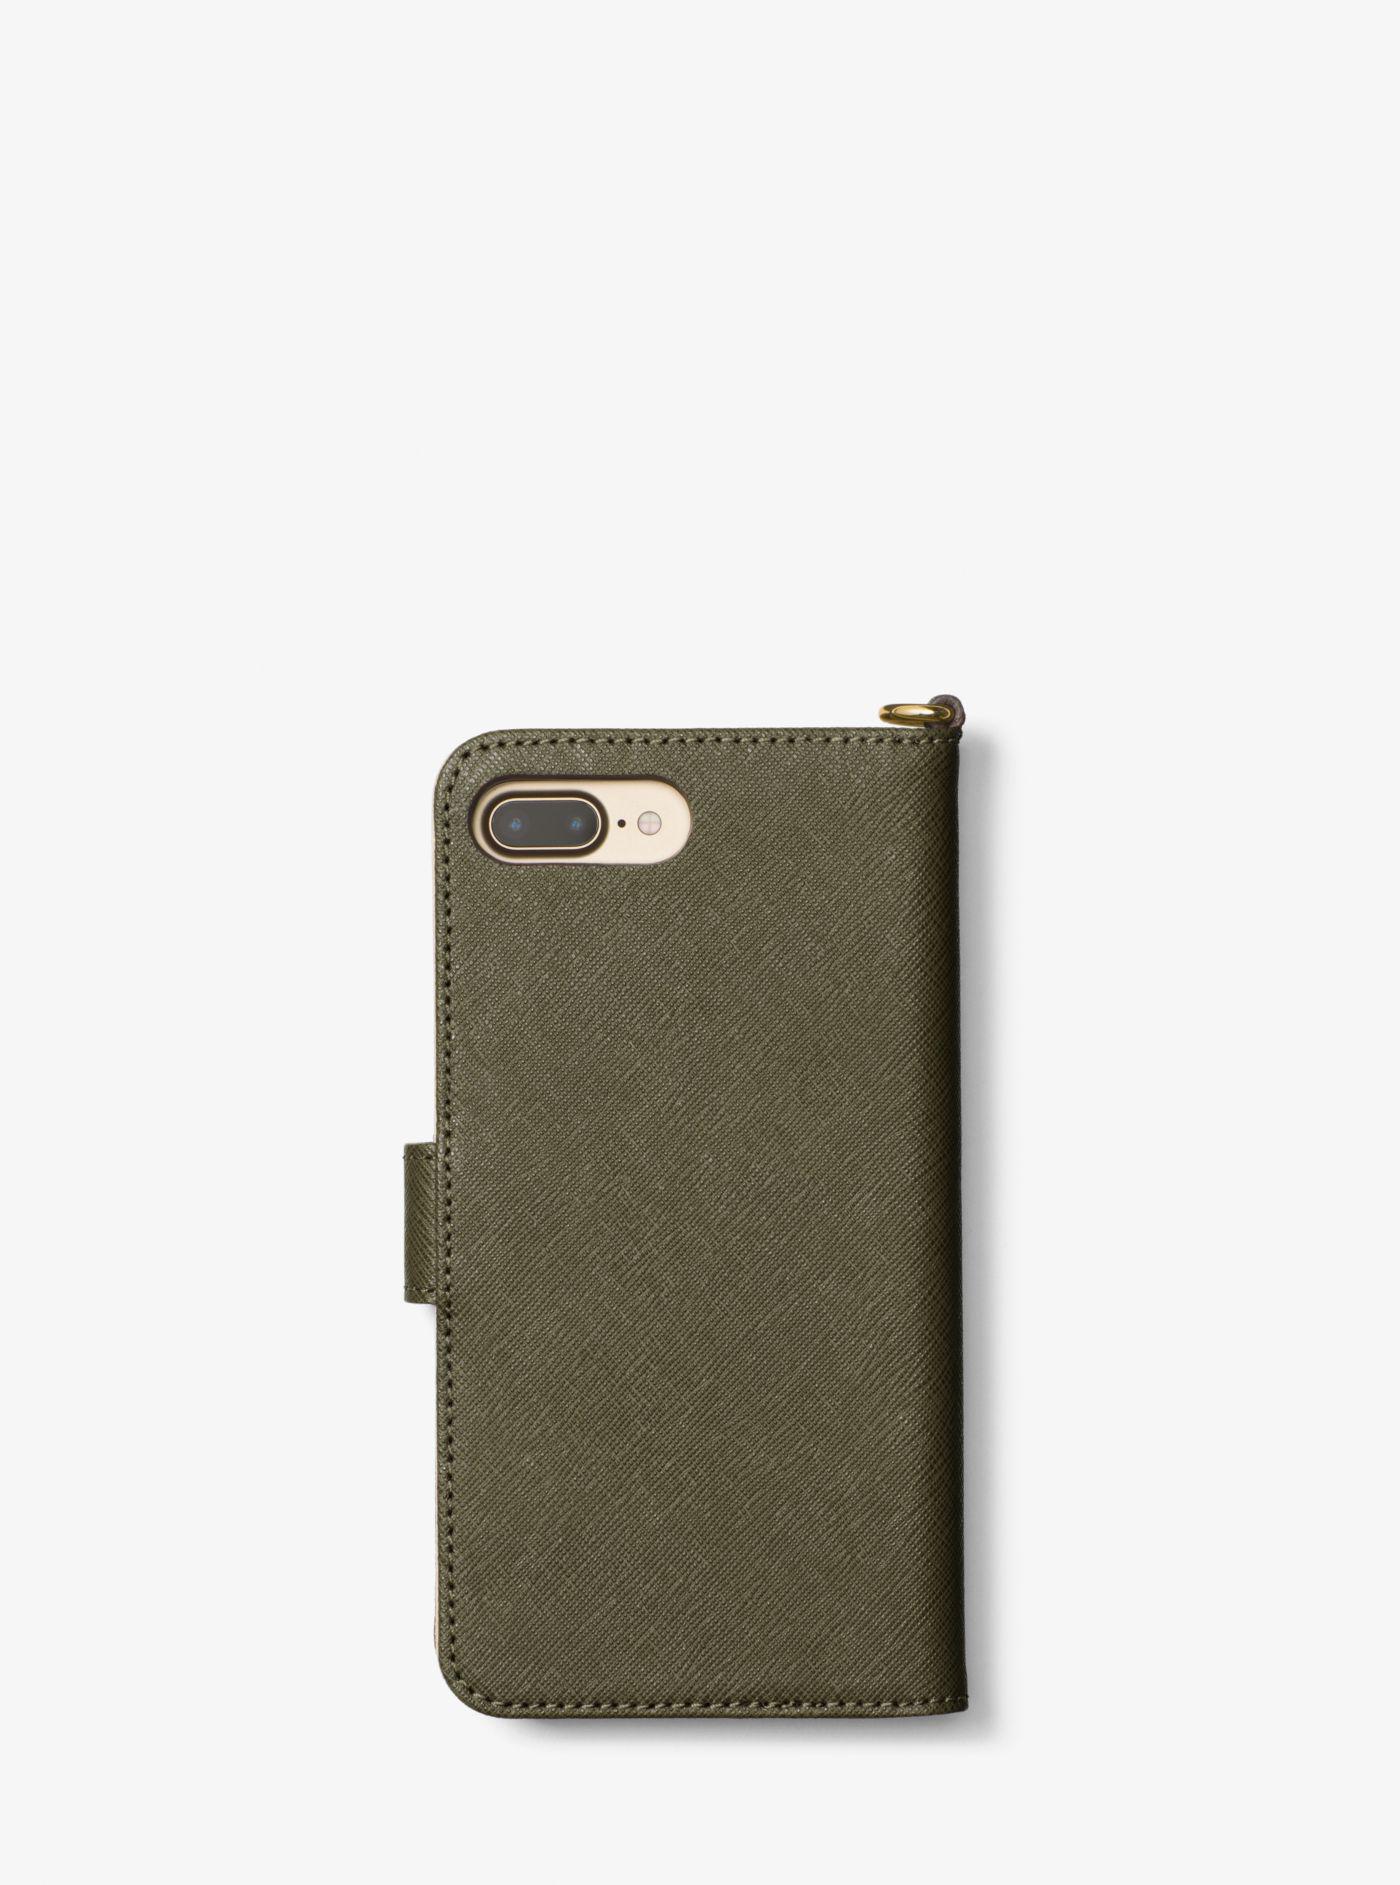 øje Harden kamp Michael Kors Saffiano Leather Folio Phone Case For Iphone 7 Plus in Olive  (Green) - Lyst